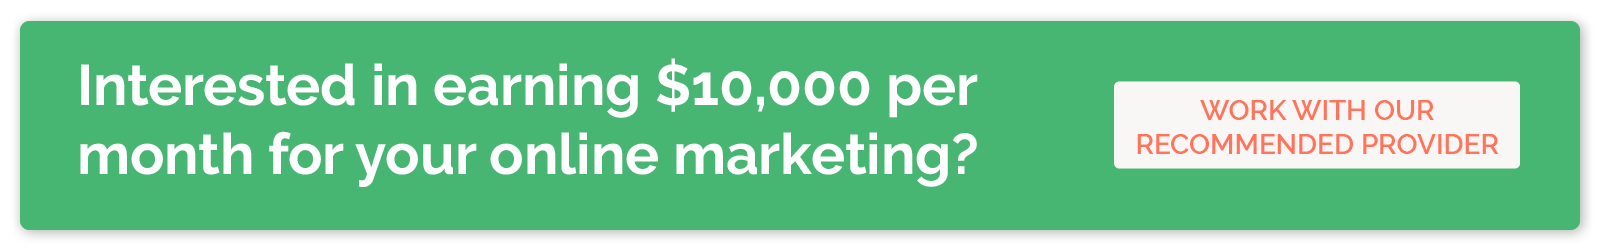 Interested in earning $10,000 per month for your online marketing? Work with our recommended provider. 